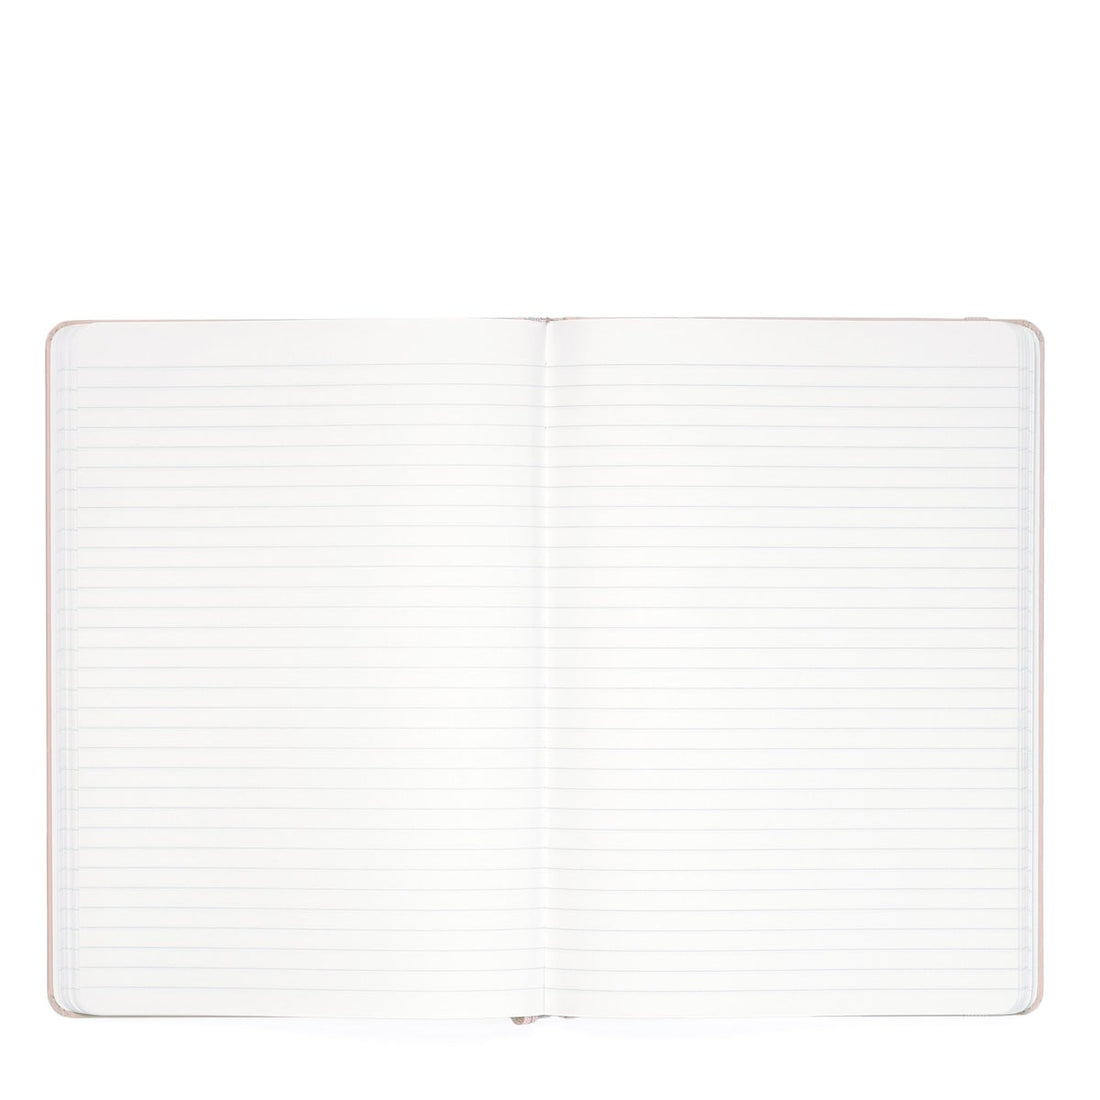 KARST - A5 HARDCOVER NOTEBOOK - PEONY - LINED